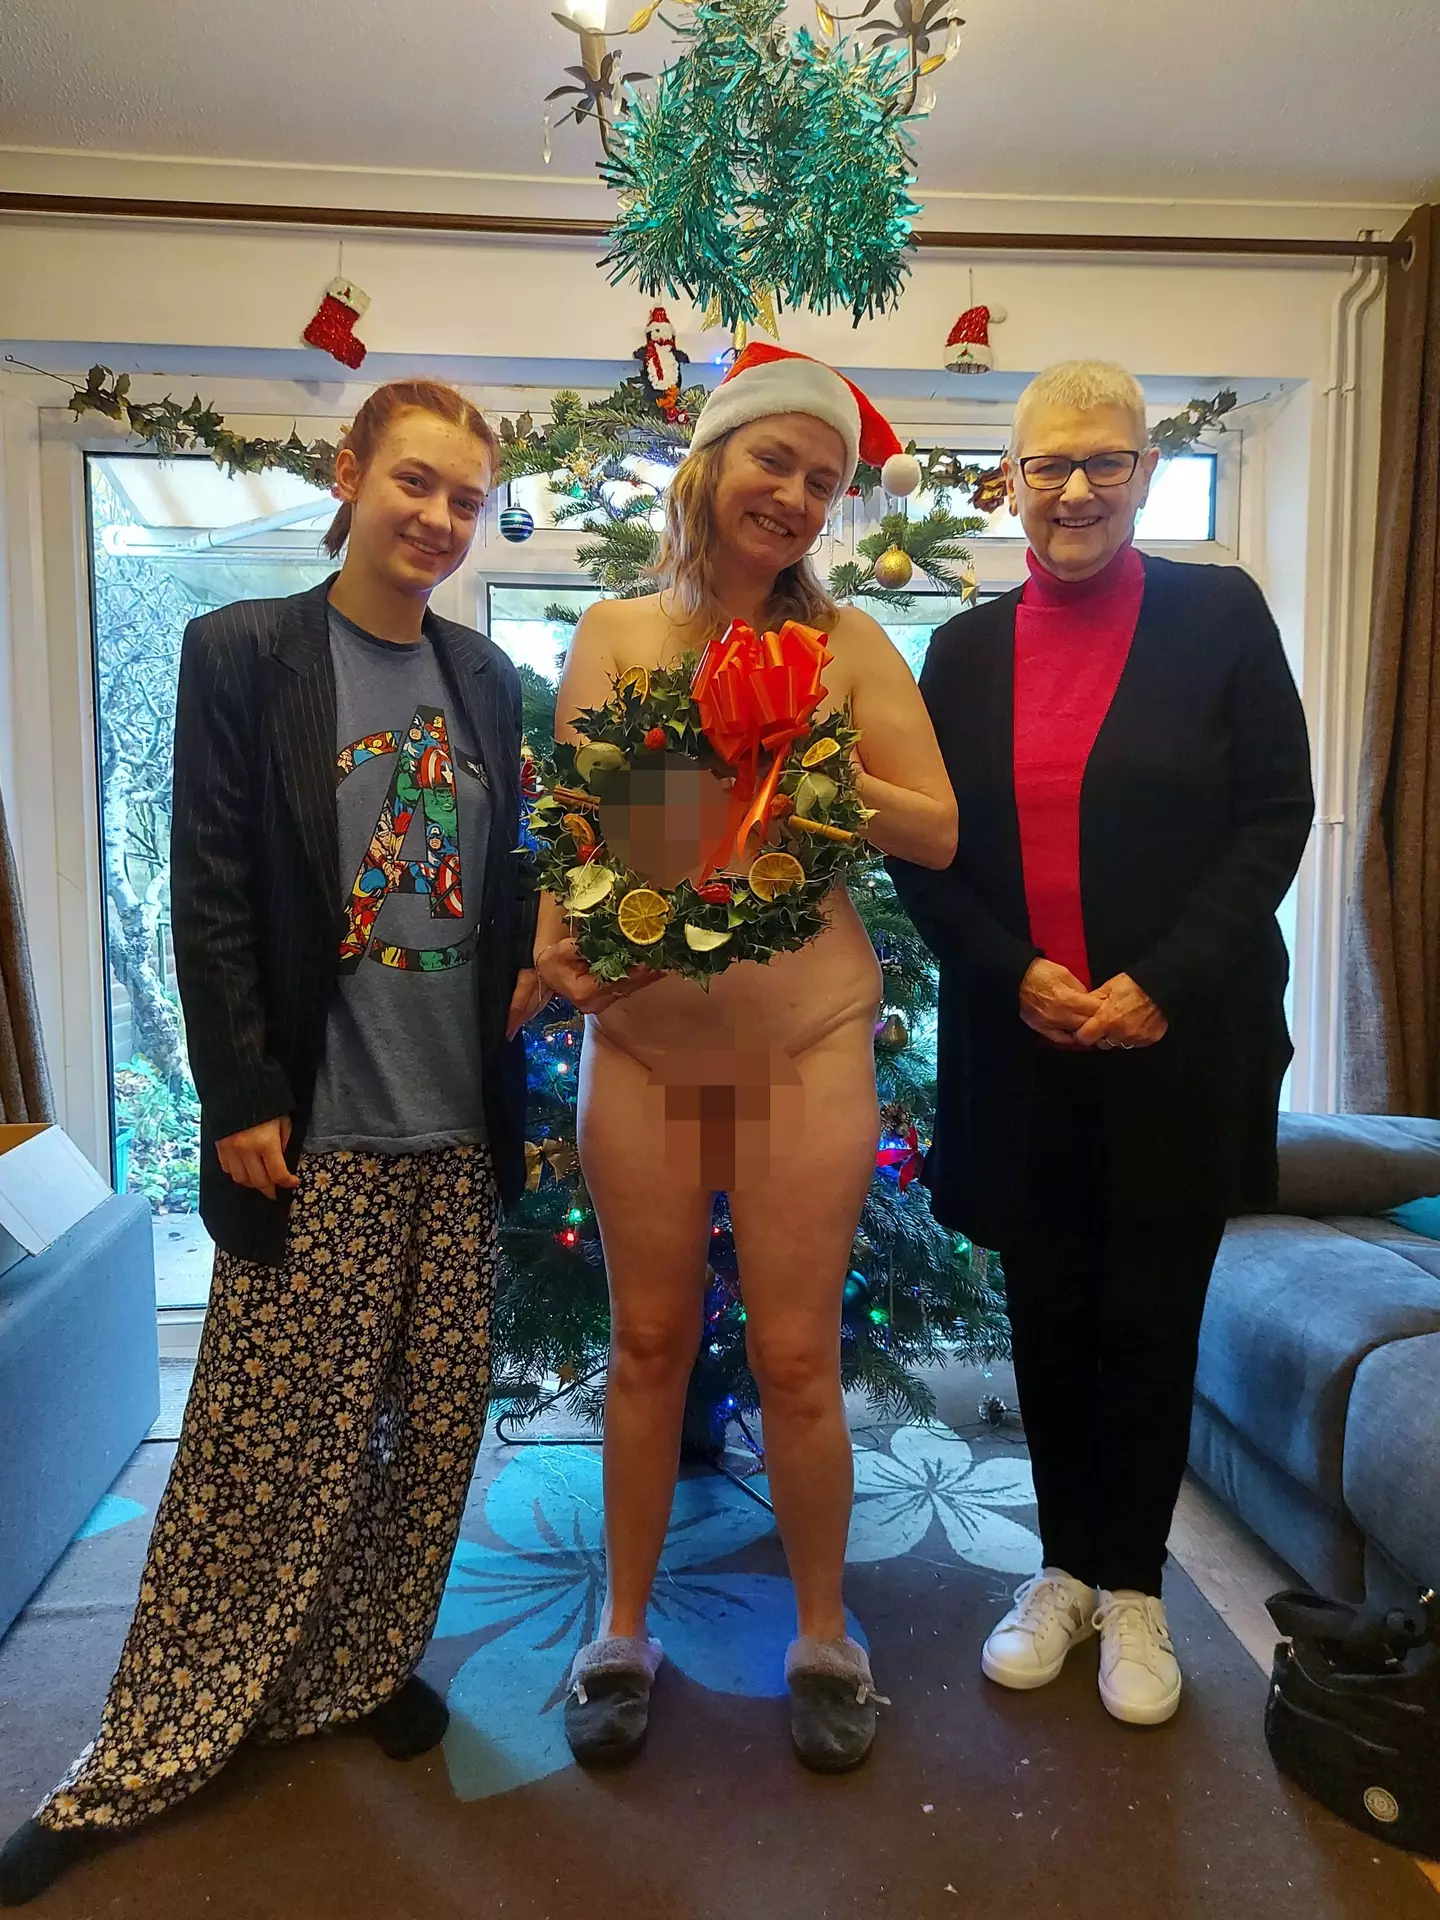 They have Helen’s mum and daughter with them on Christmas.